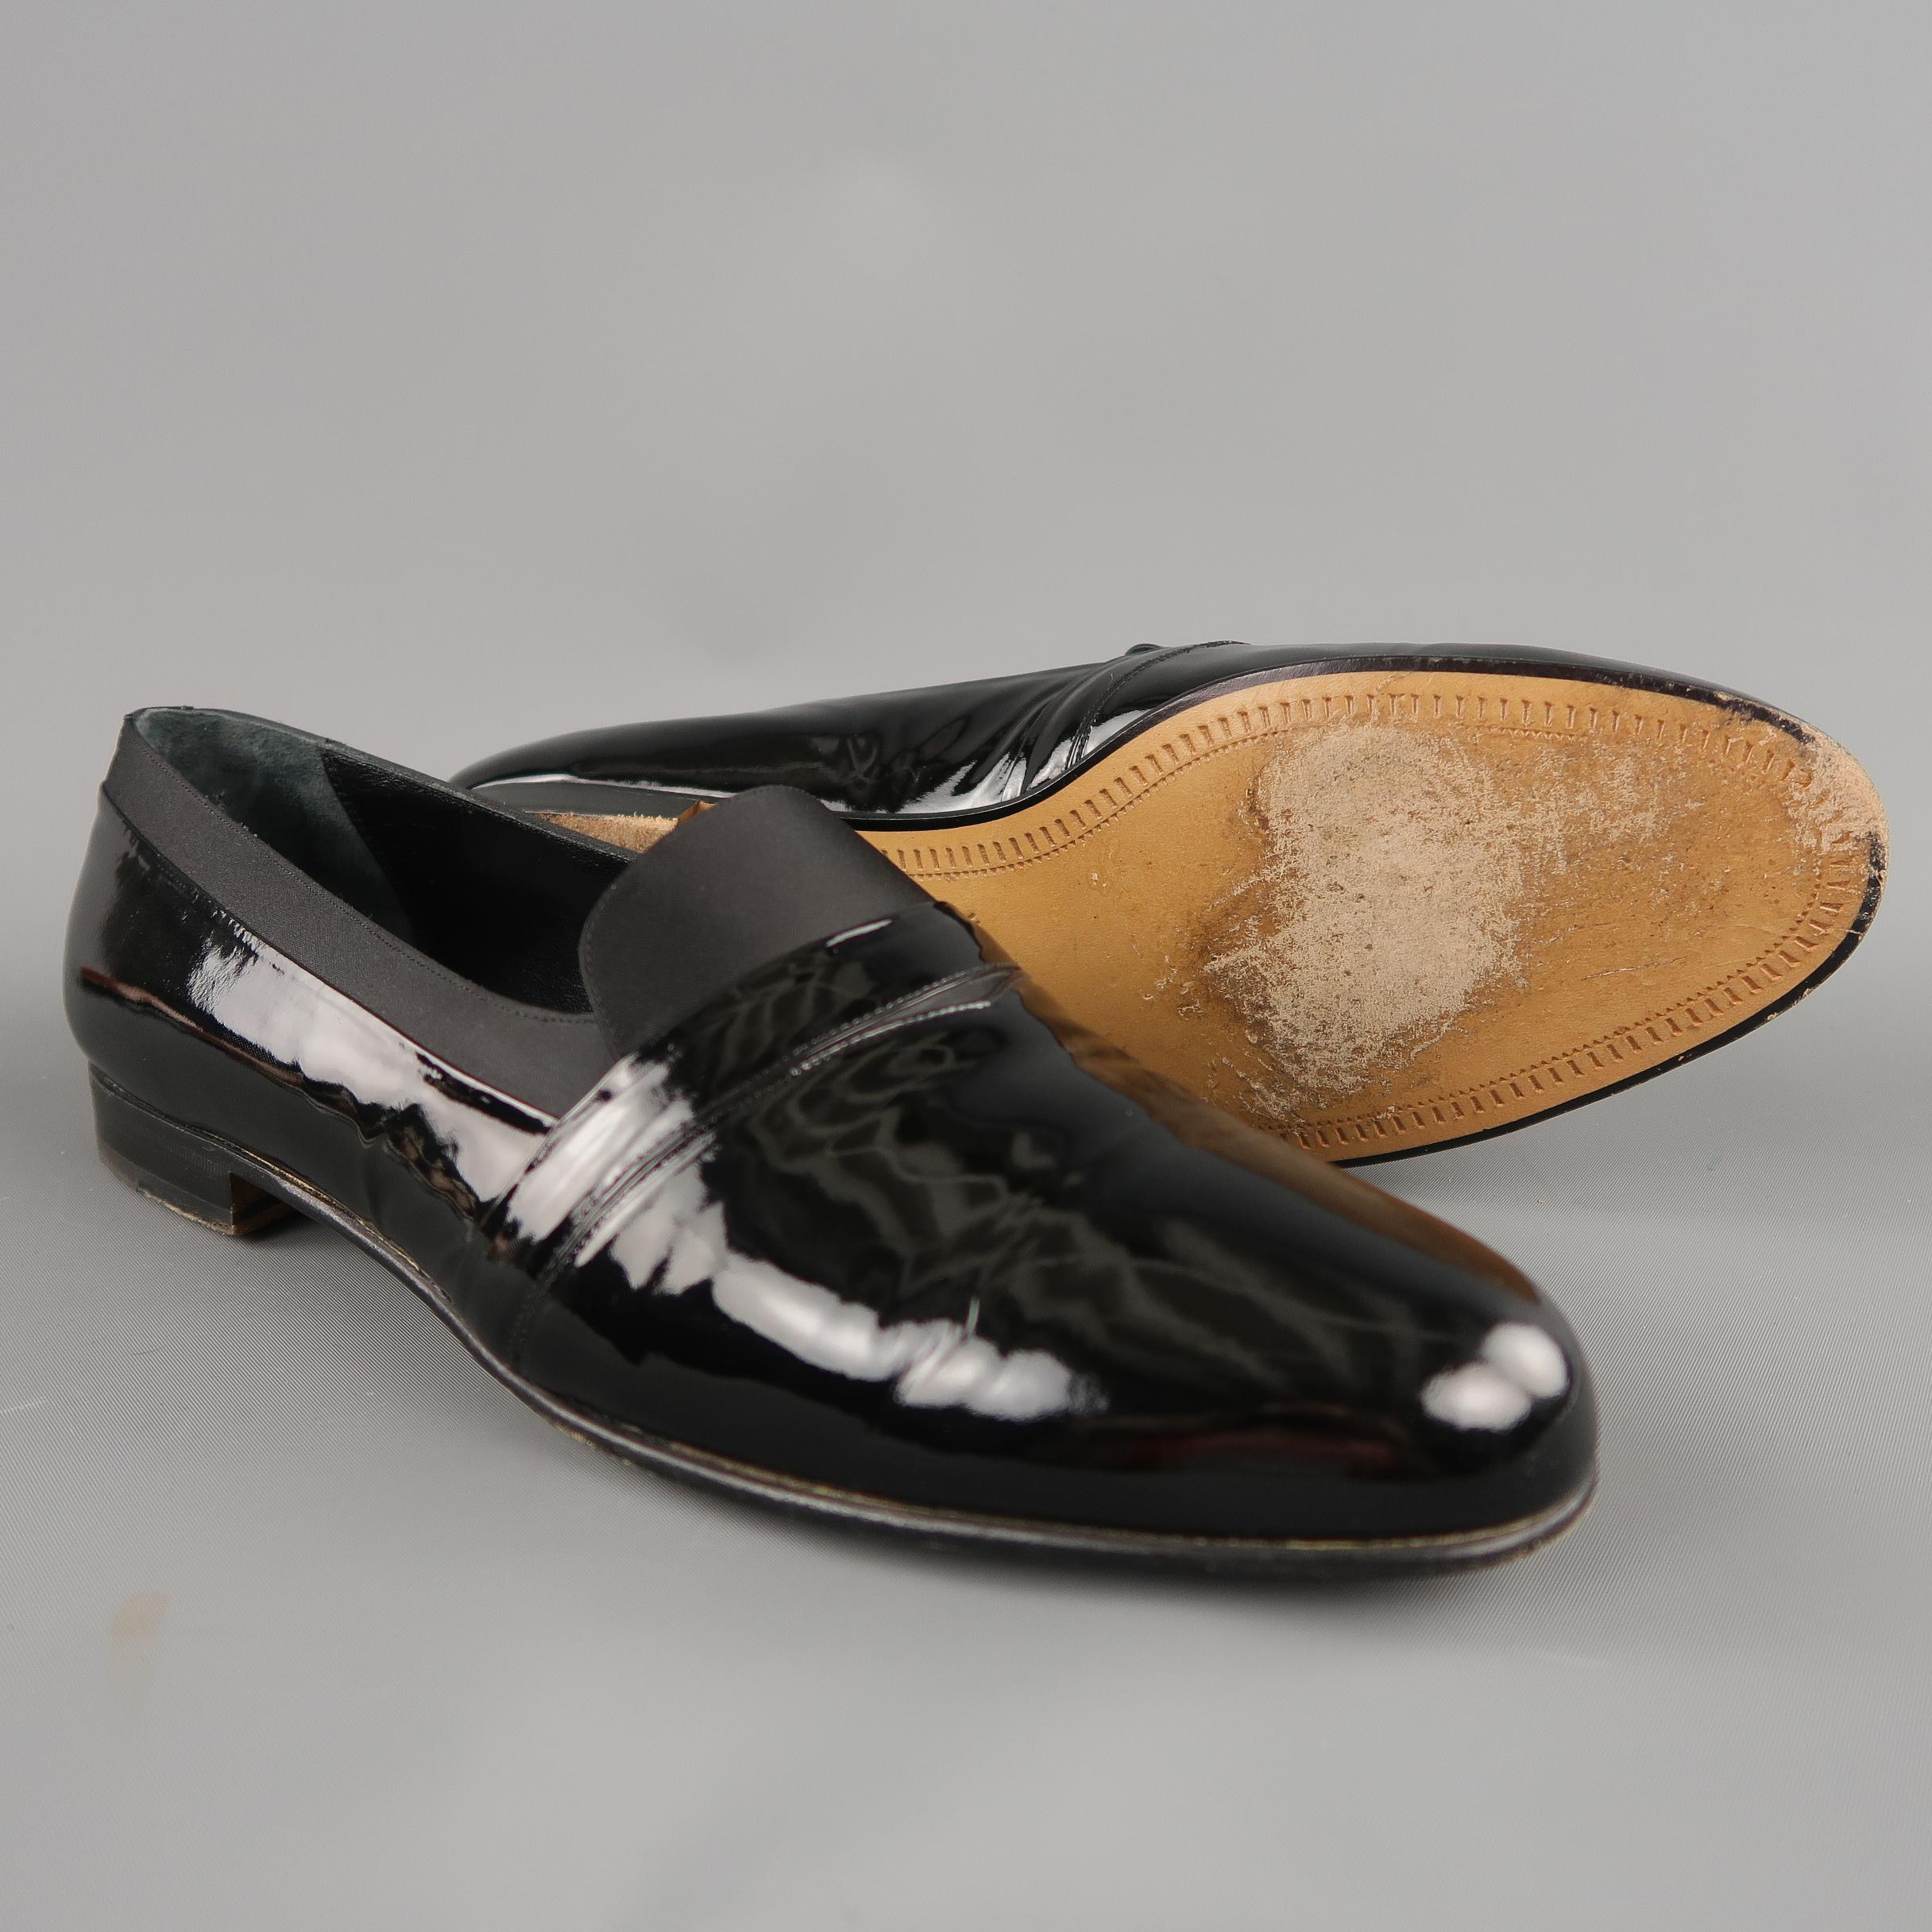 Vintage MELZAN tuxedo slippers come in black patent leather with satin tongue and piping. Handmade in Spain.
 
Excellent Pre-Owned Condition.
Marked:13
 
Outsole: 12.5 x 4 in.